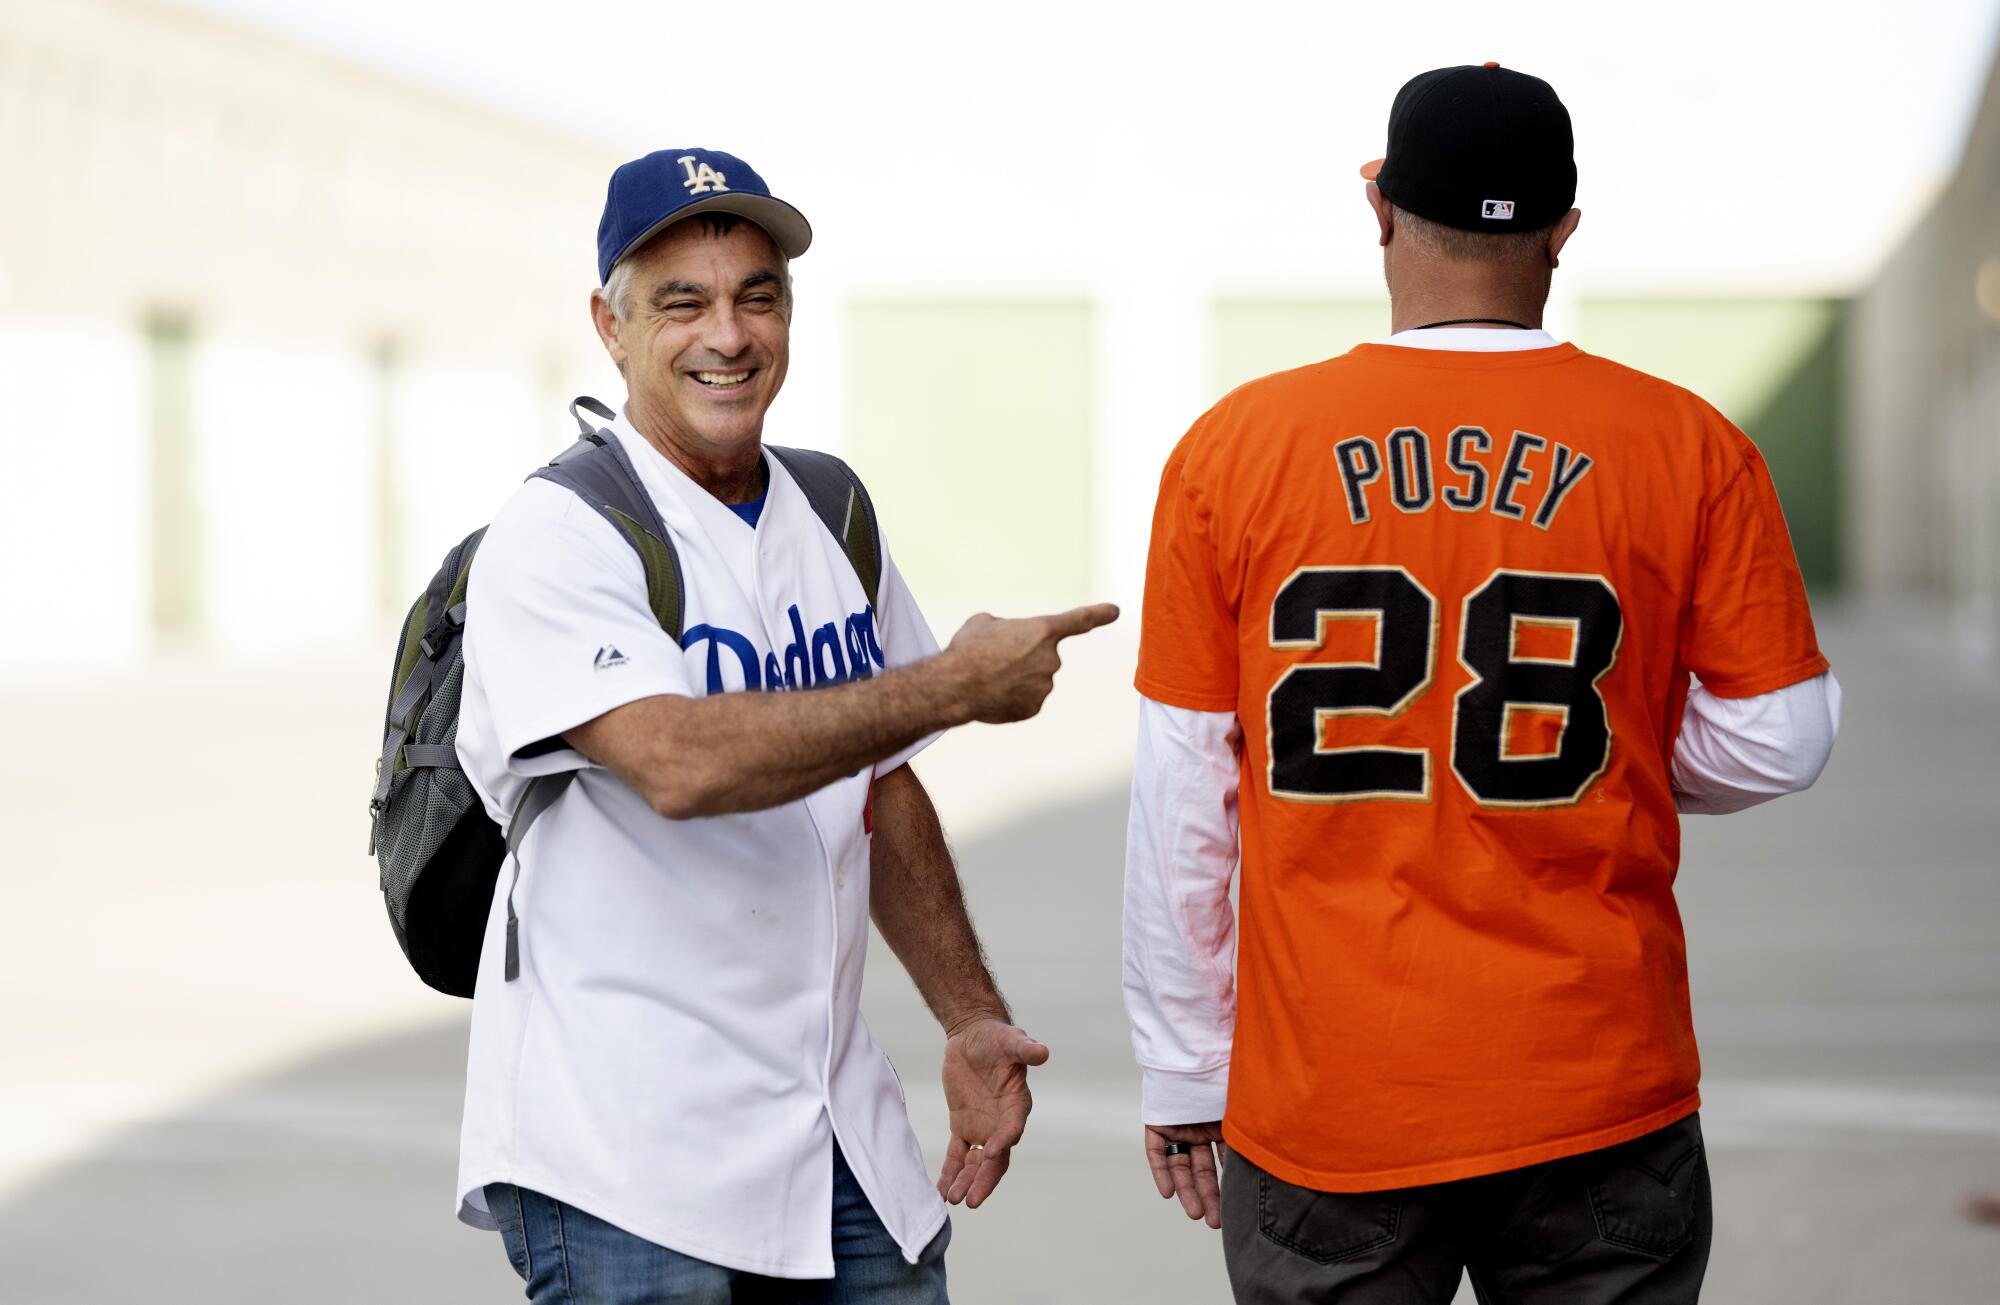 Dodgers fan Chris Rinaldi smiles and points to his friend, who is wearing a Buster Posey jersey